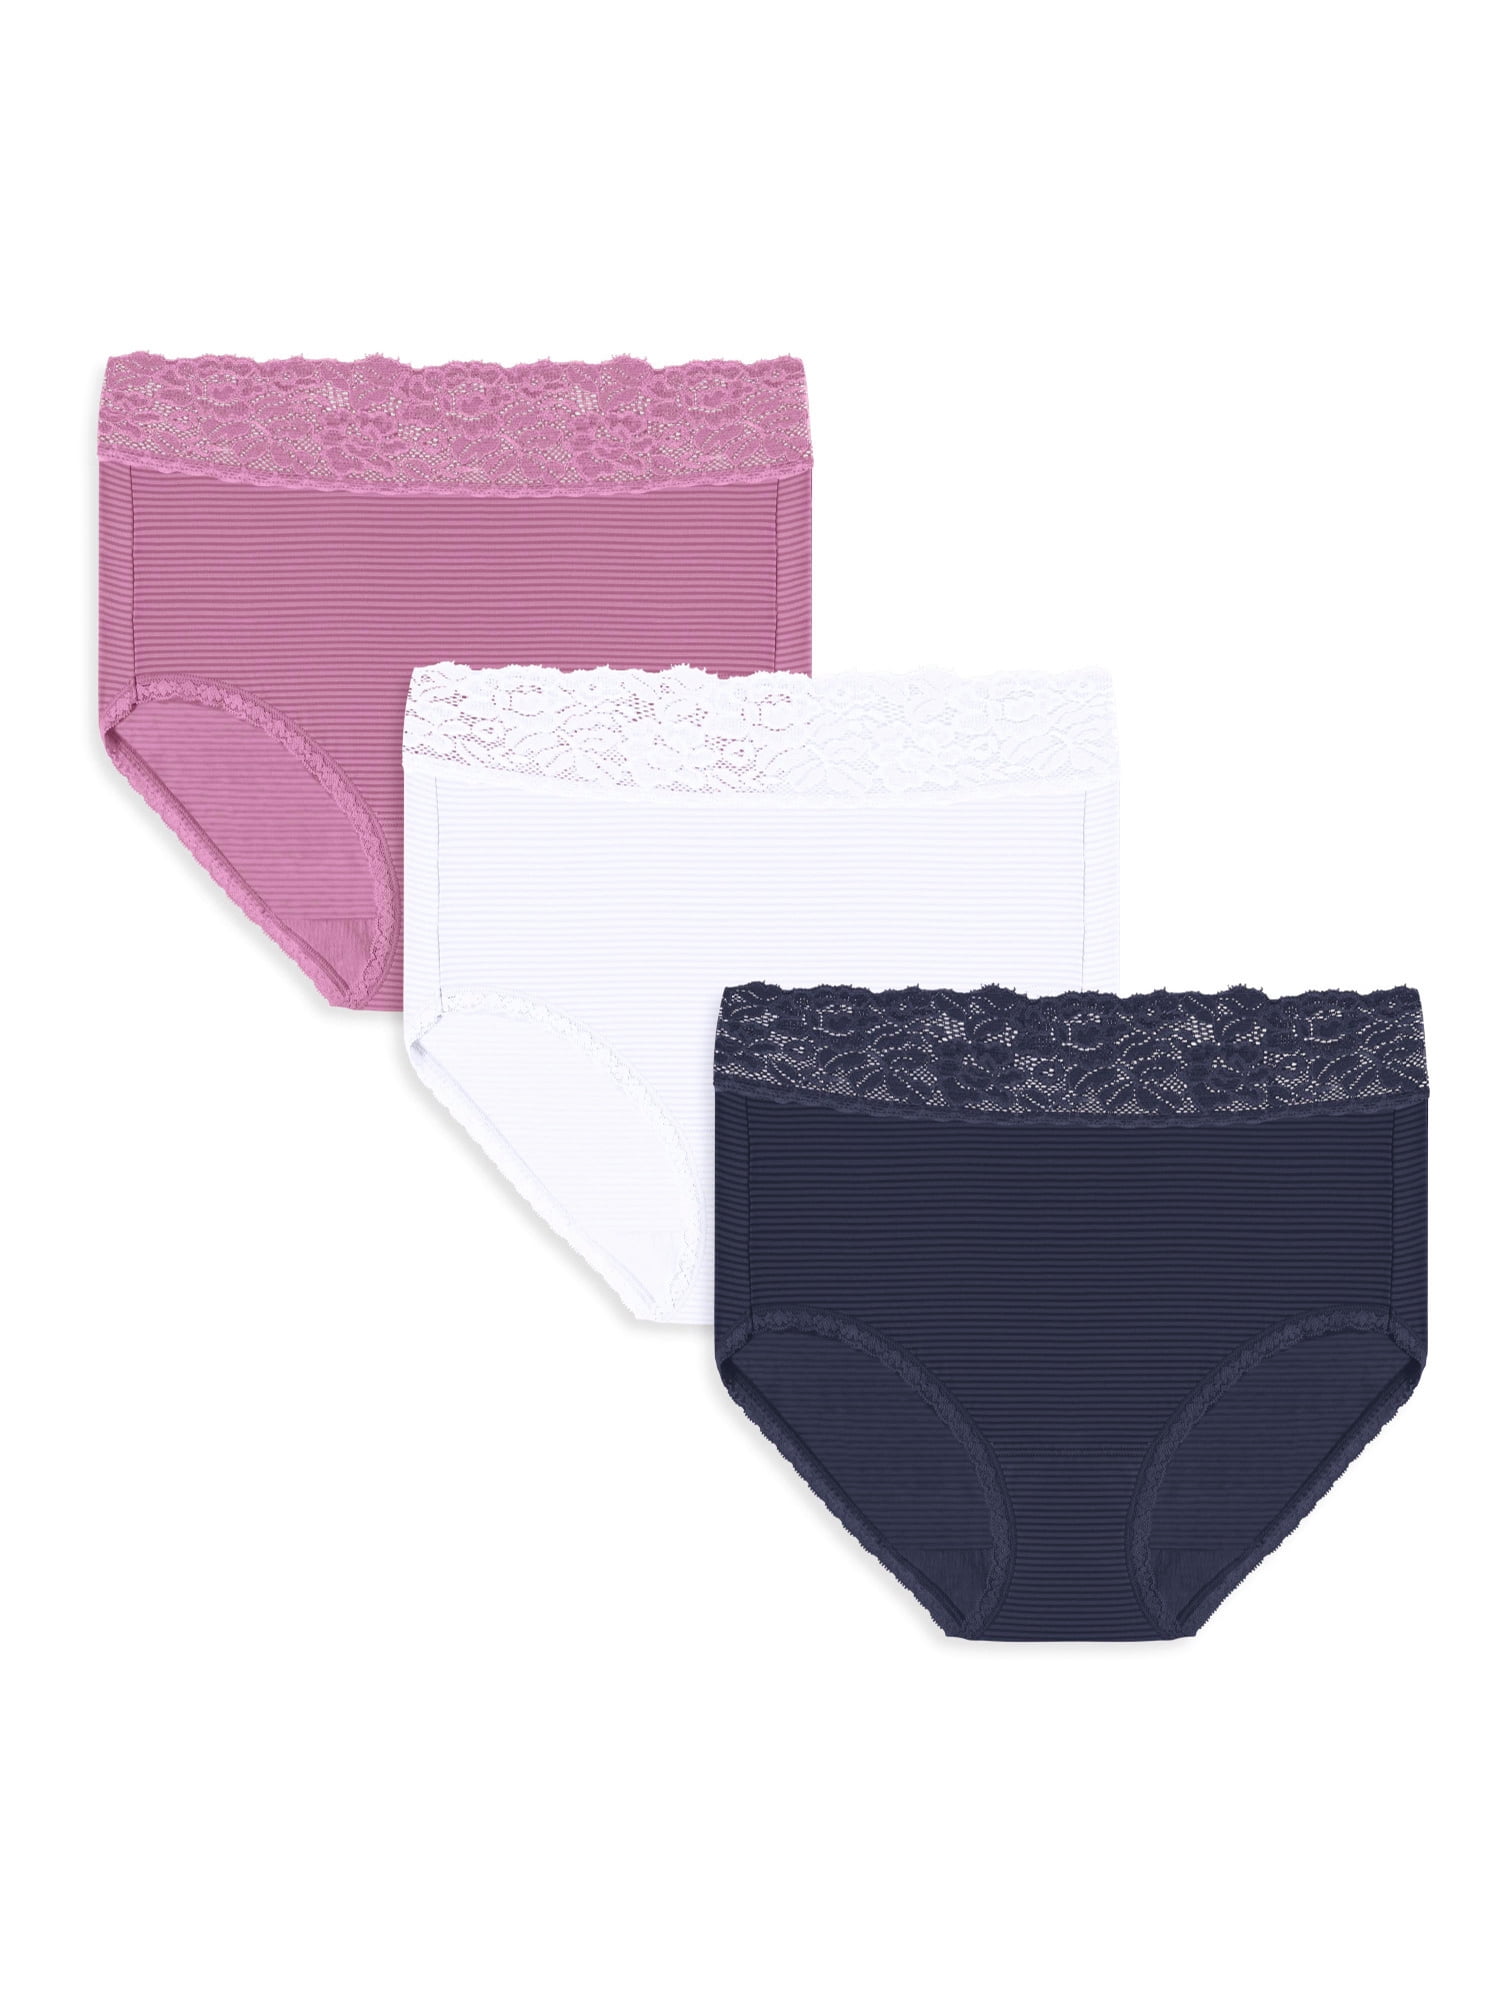 Bali Luxe Super Soft Stretch Cotton Briefs Panties with a Plush